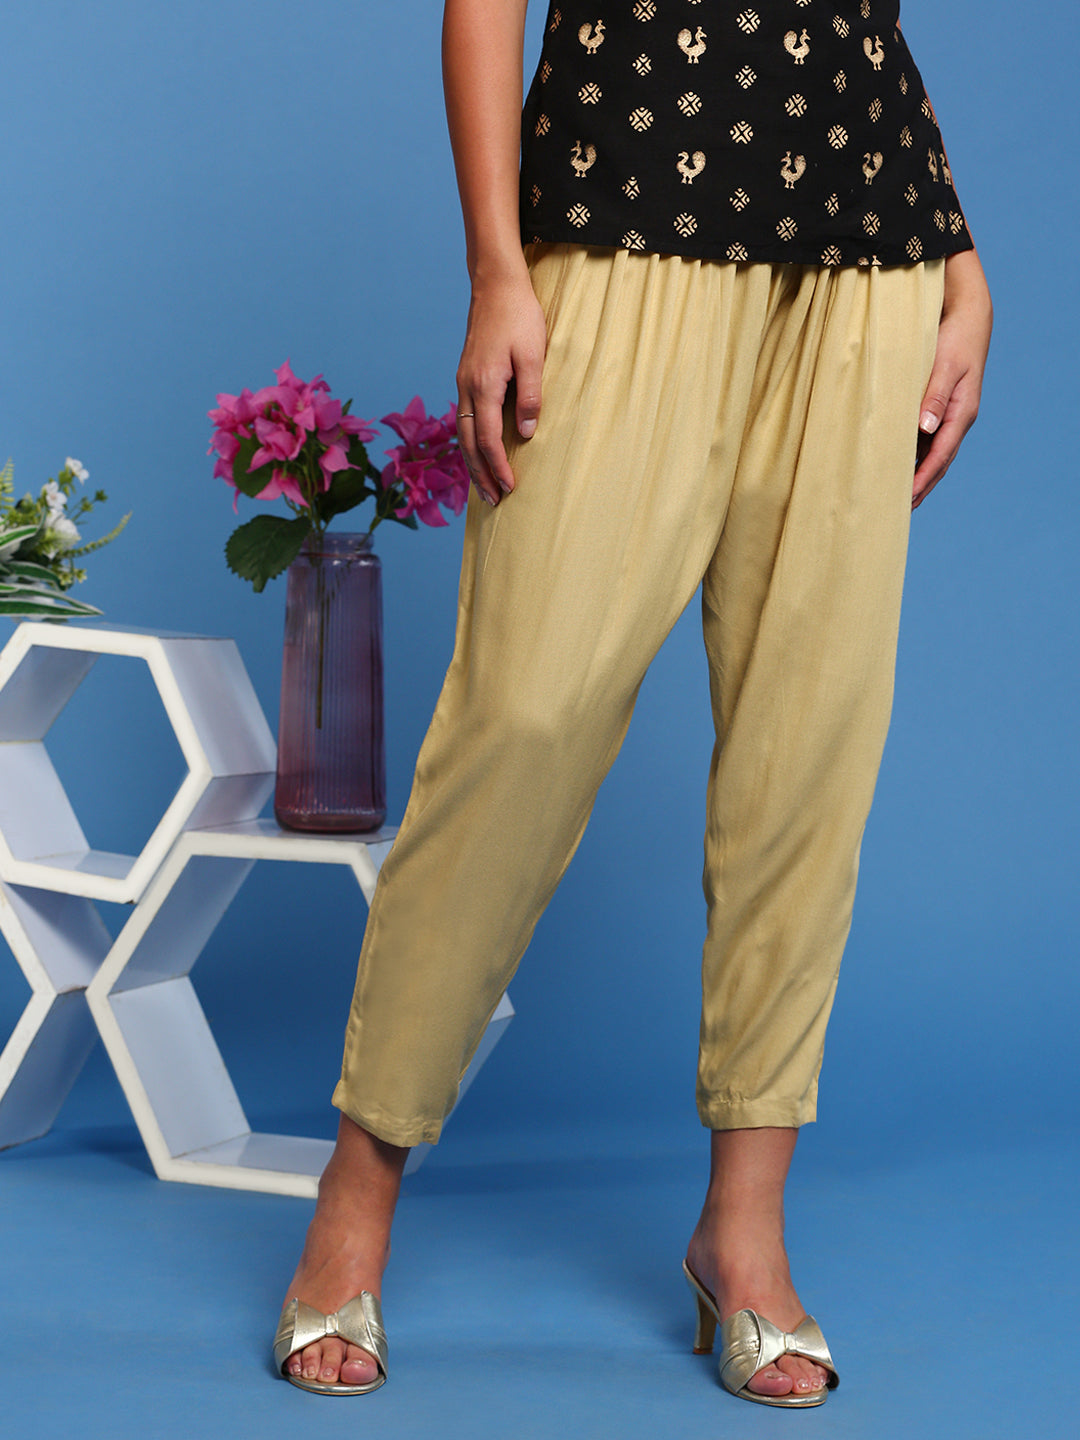 HOW TO STITCH PARALLEL PANTS/ SALWAR | Pants sewing pattern, Blouse pattern  sewing, Sewing pattern design